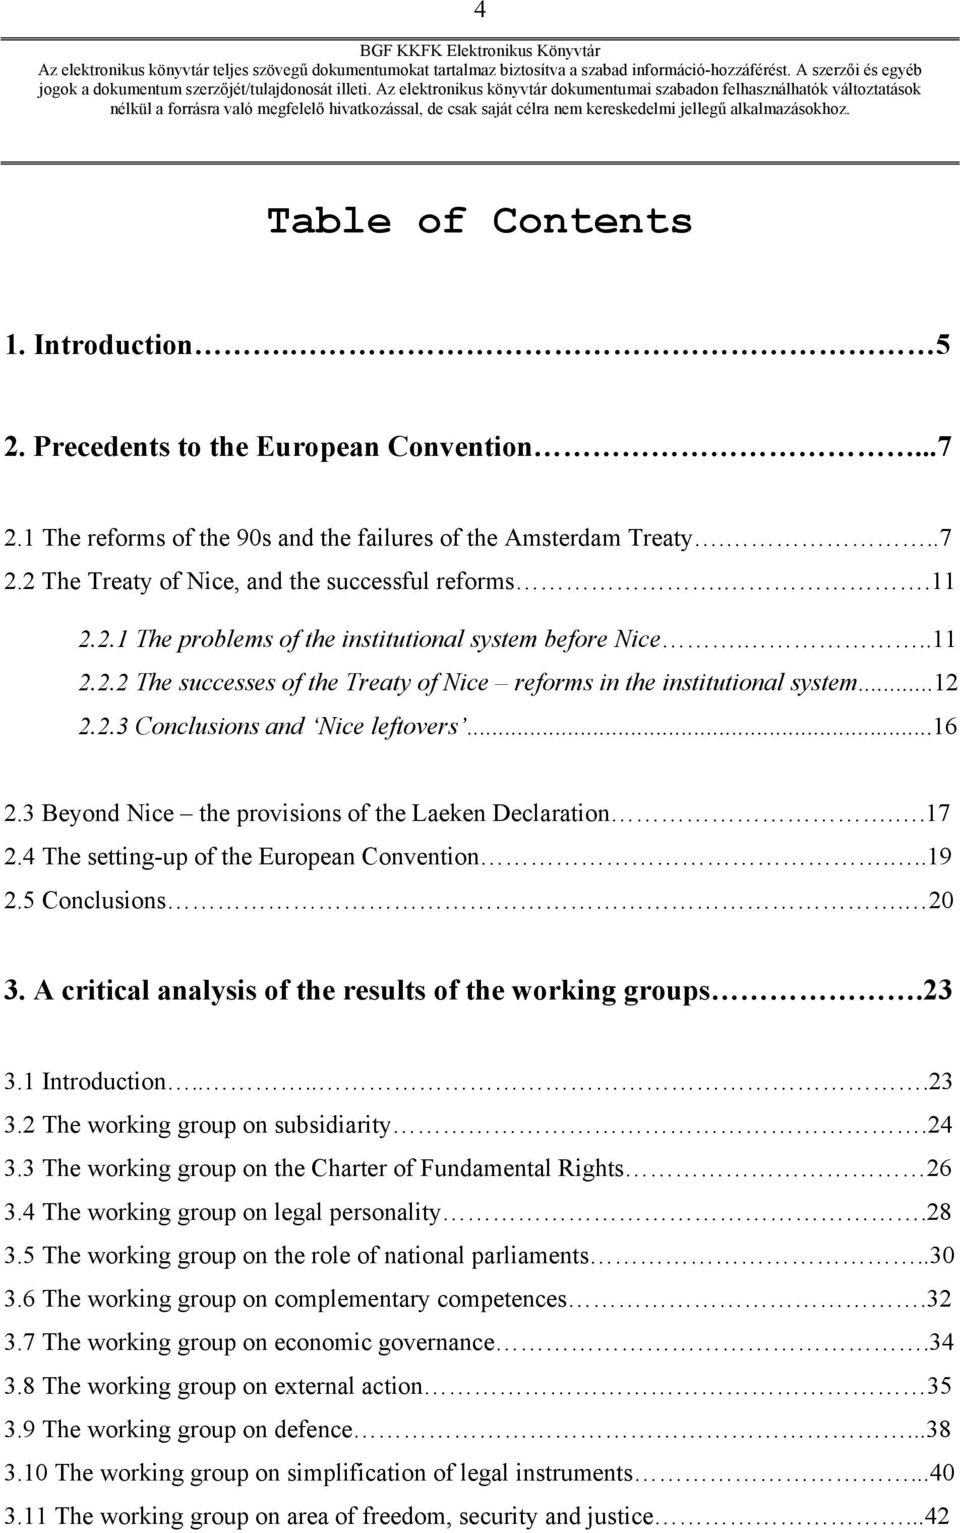 3 Beyond Nice the provisions of the Laeken Declaration..17 2.4 The setting-up of the European Convention...19 2.5 Conclusions. 20 3. A critical analysis of the results of the working groups.23 3.